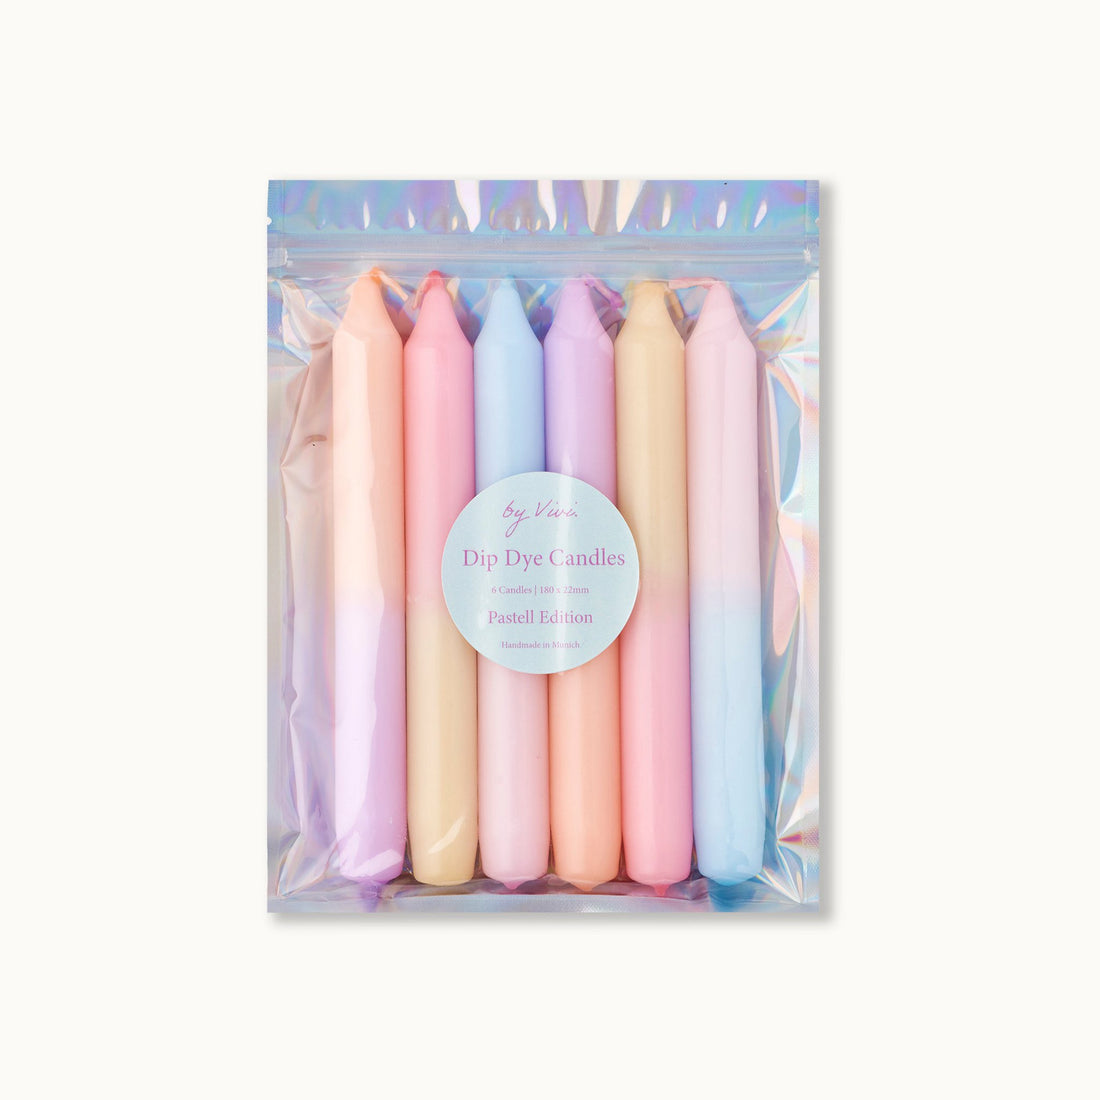 Dip dye candles in a set: Pastel Edition